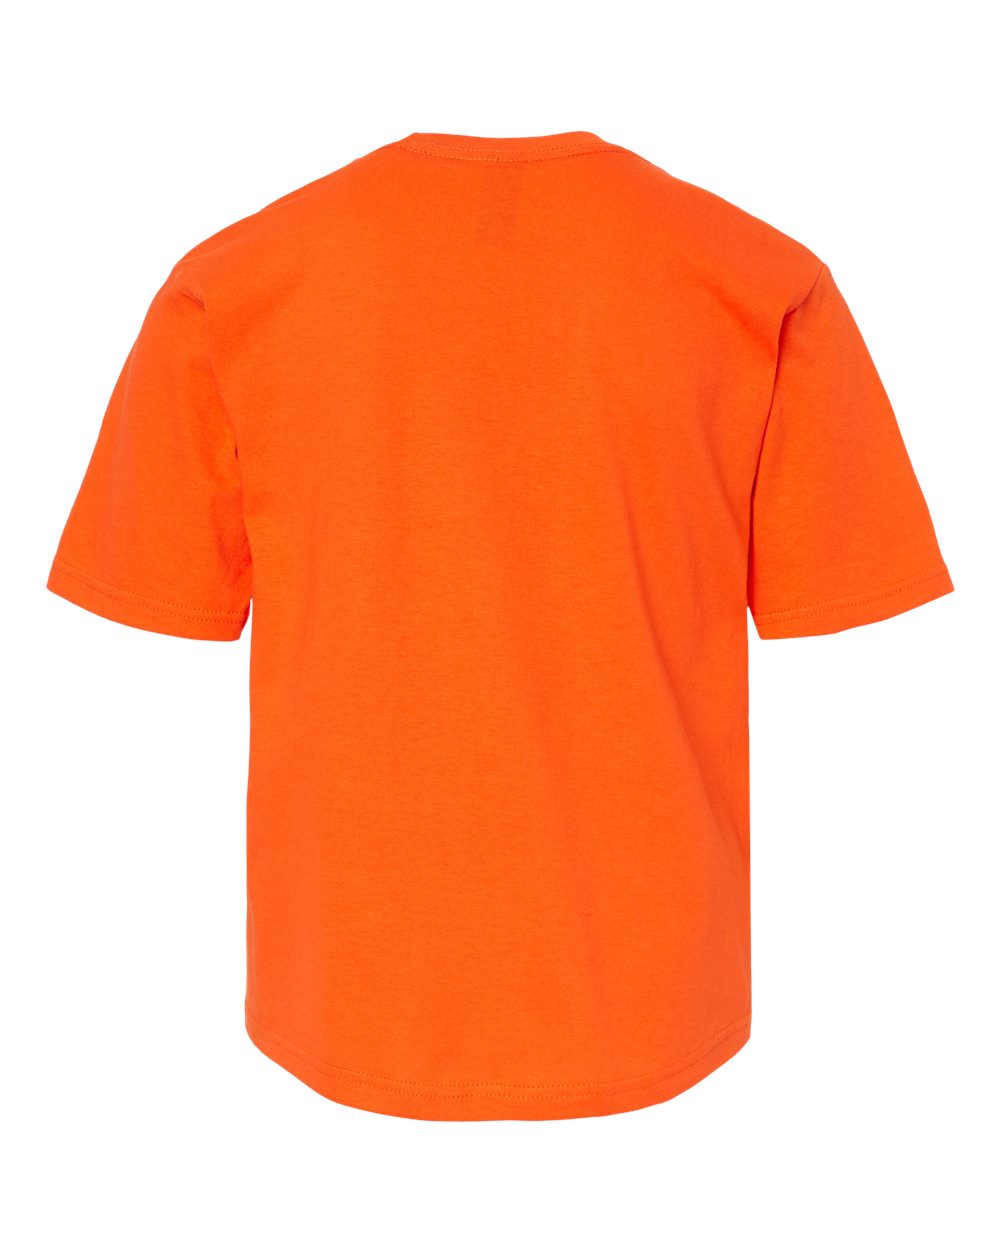 M&O Youth Gold Soft Touch T-Shirt 4850 #color_Orange